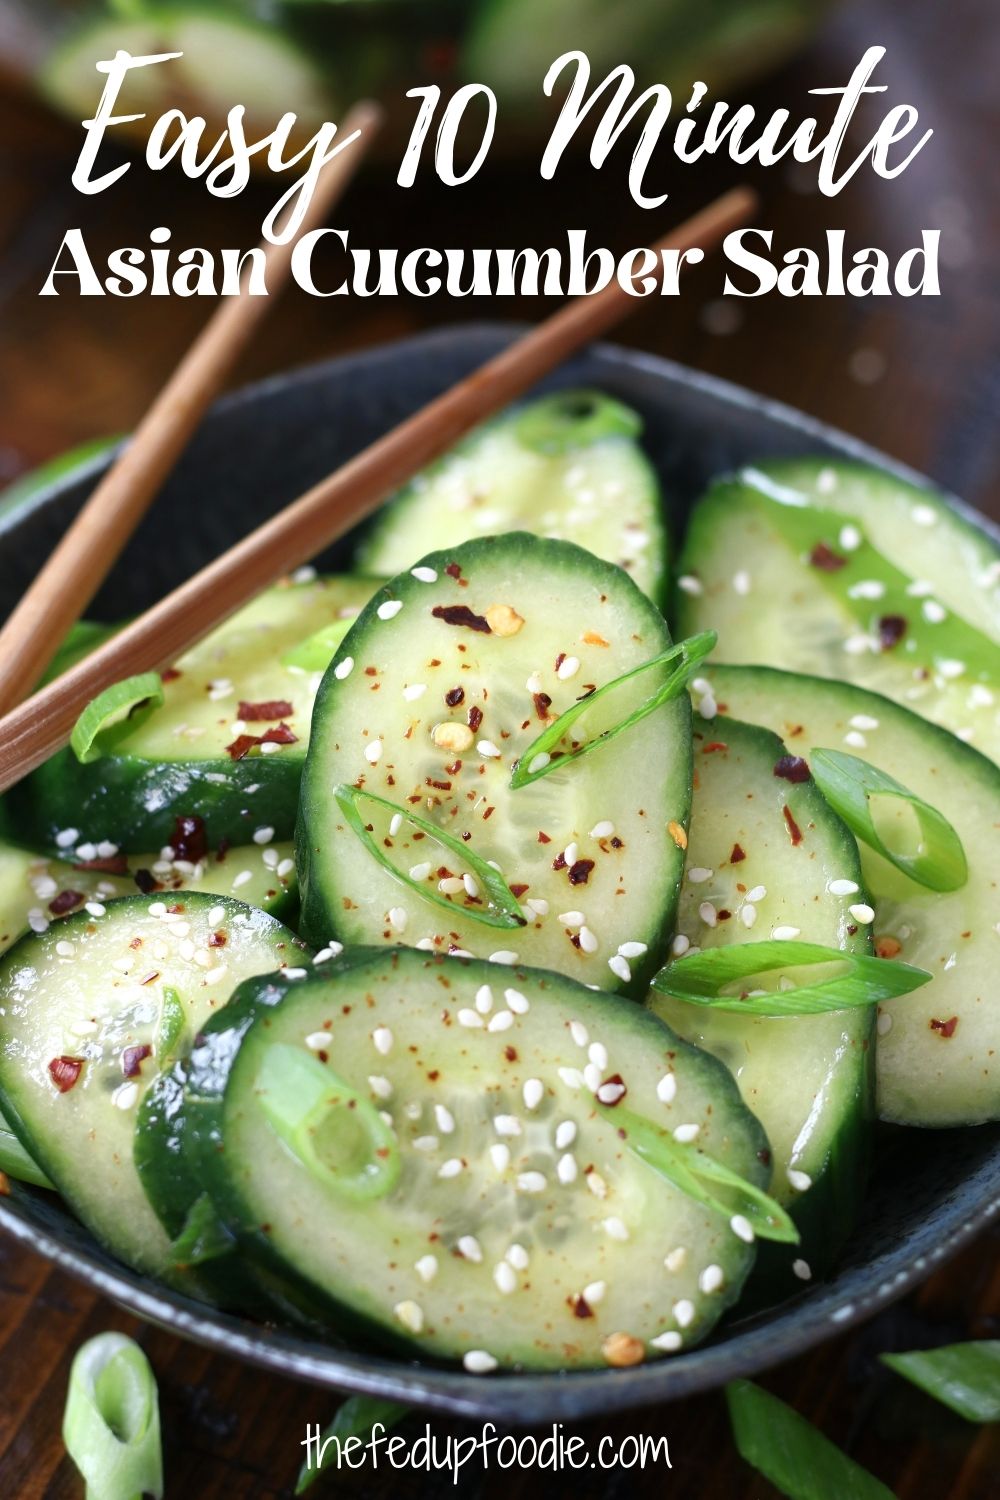 Asian Cucumber Salad is one of the easiest side dishes that is made with simple ingredients. This recipe comes together in under 10 minutes and is incredibly mouthwatering. One of the best salads to have on a hot summer evening. 
#AsianCucumberSalad #AsianCucumberSaladRecipe #AsianCucumberSaladRecipeRiceVinegar #AsianCucumberSaladRecipeSesameOil #AsianCucumberSaladSoySauce 